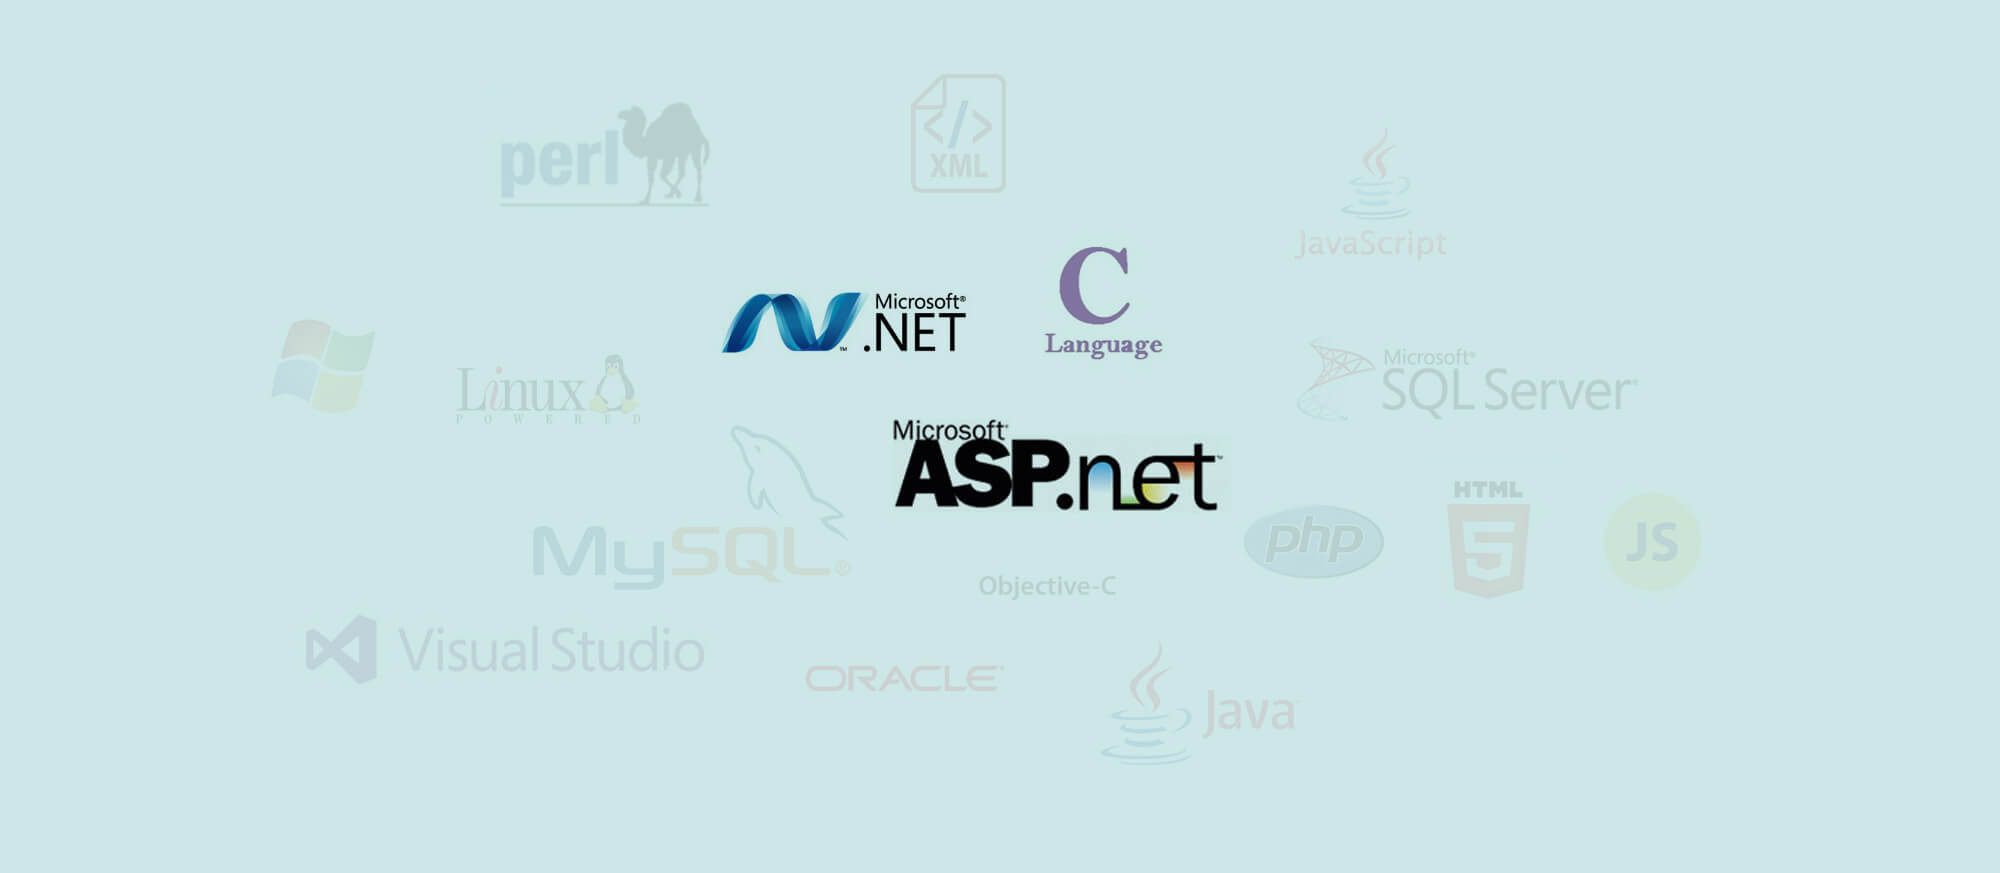 SunNet Solutions is proficient in multiple computer programming languages such as .net, c, and asp.net.